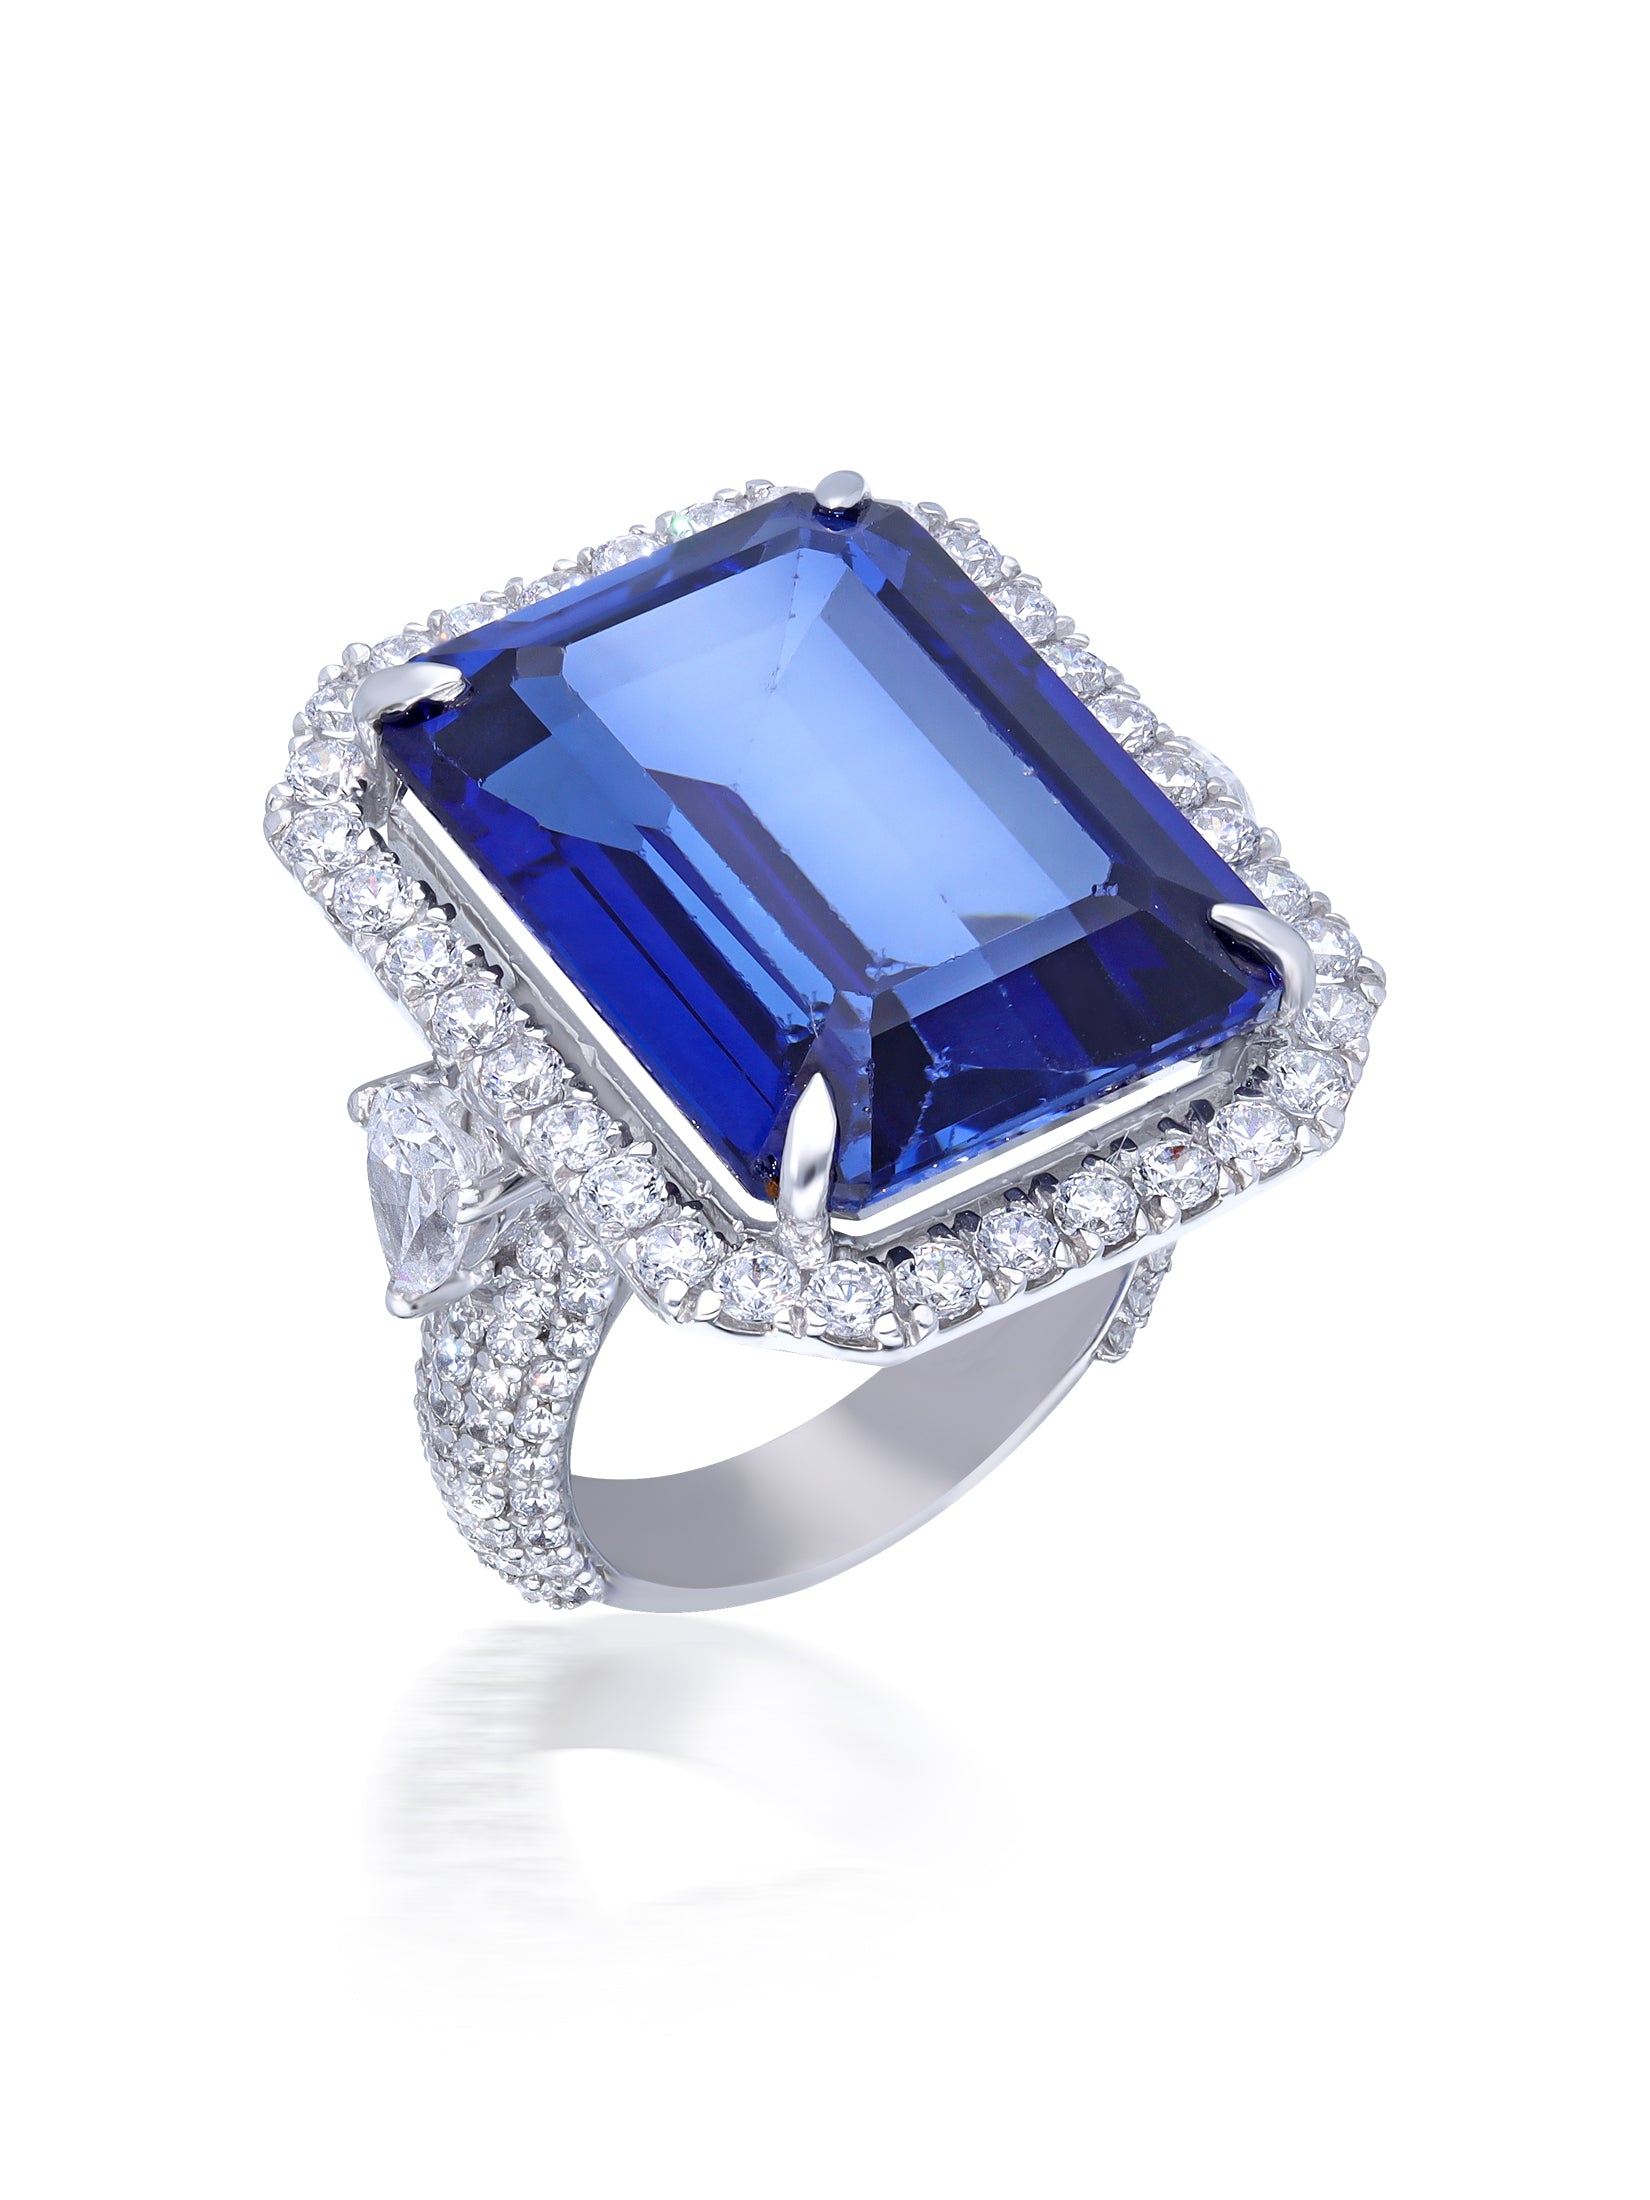 Blue and White Trendy Cocktail Ring